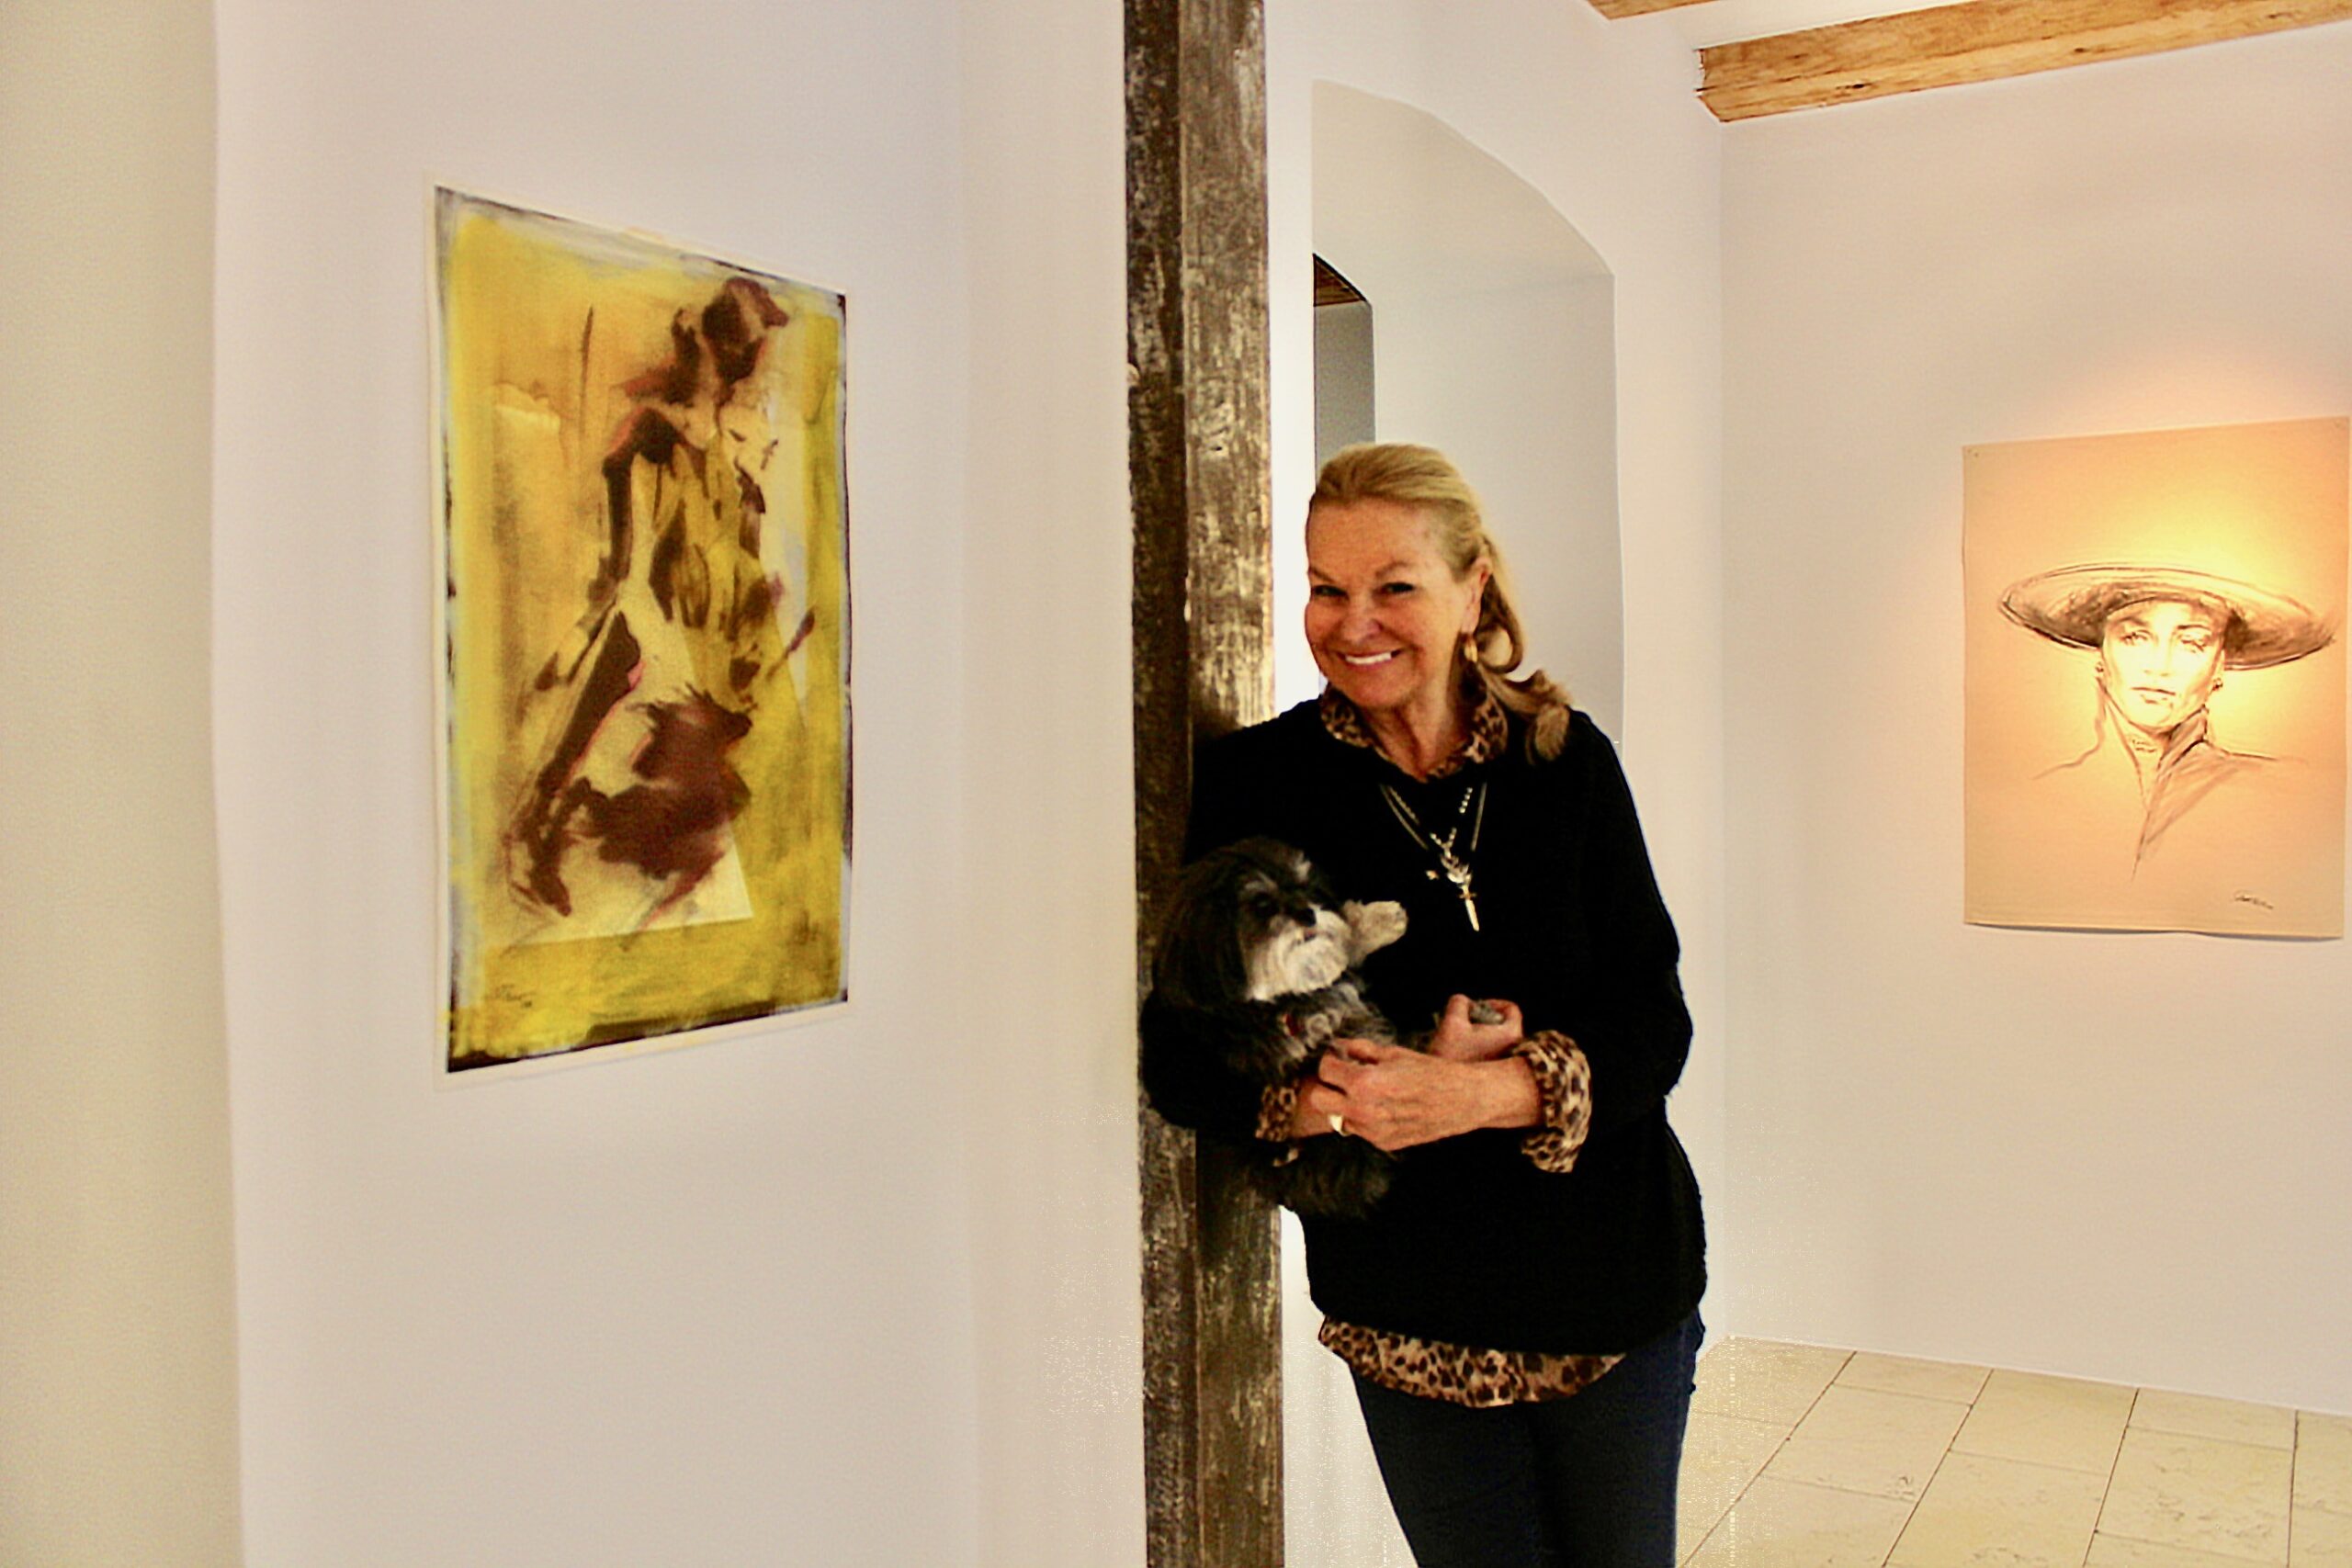 Artist Sabina Streeter at a recent exhibition of her work in Germany. COURTESY THE ARTIST